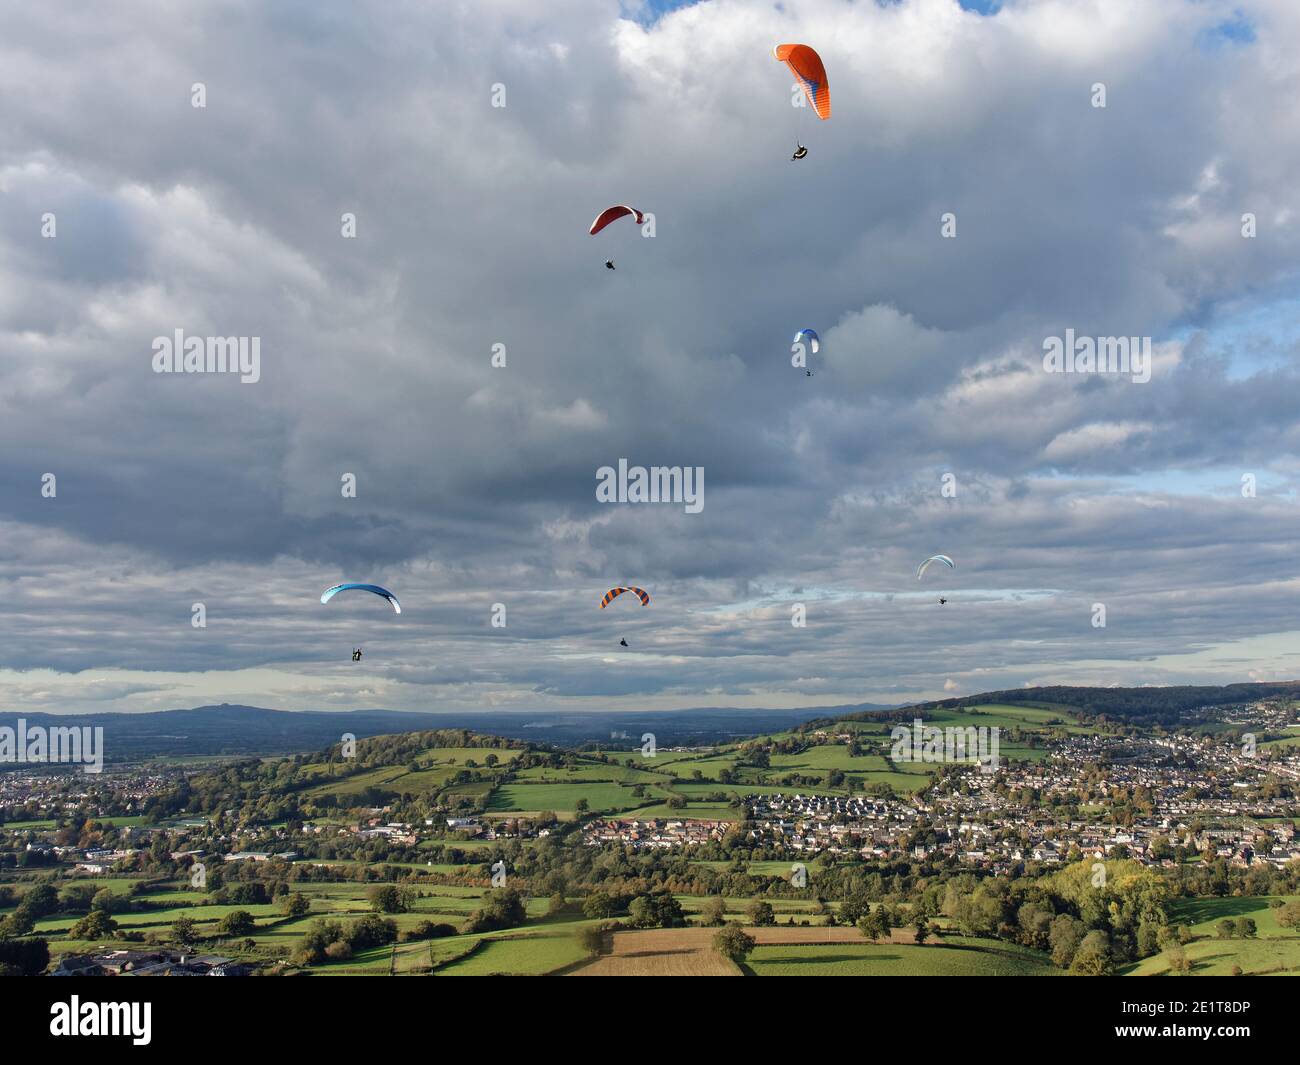 Paragliders flying from Selsley Hill, with Stroud and Gloucester in the background, Gloucestershire, UK, October. Stock Photo